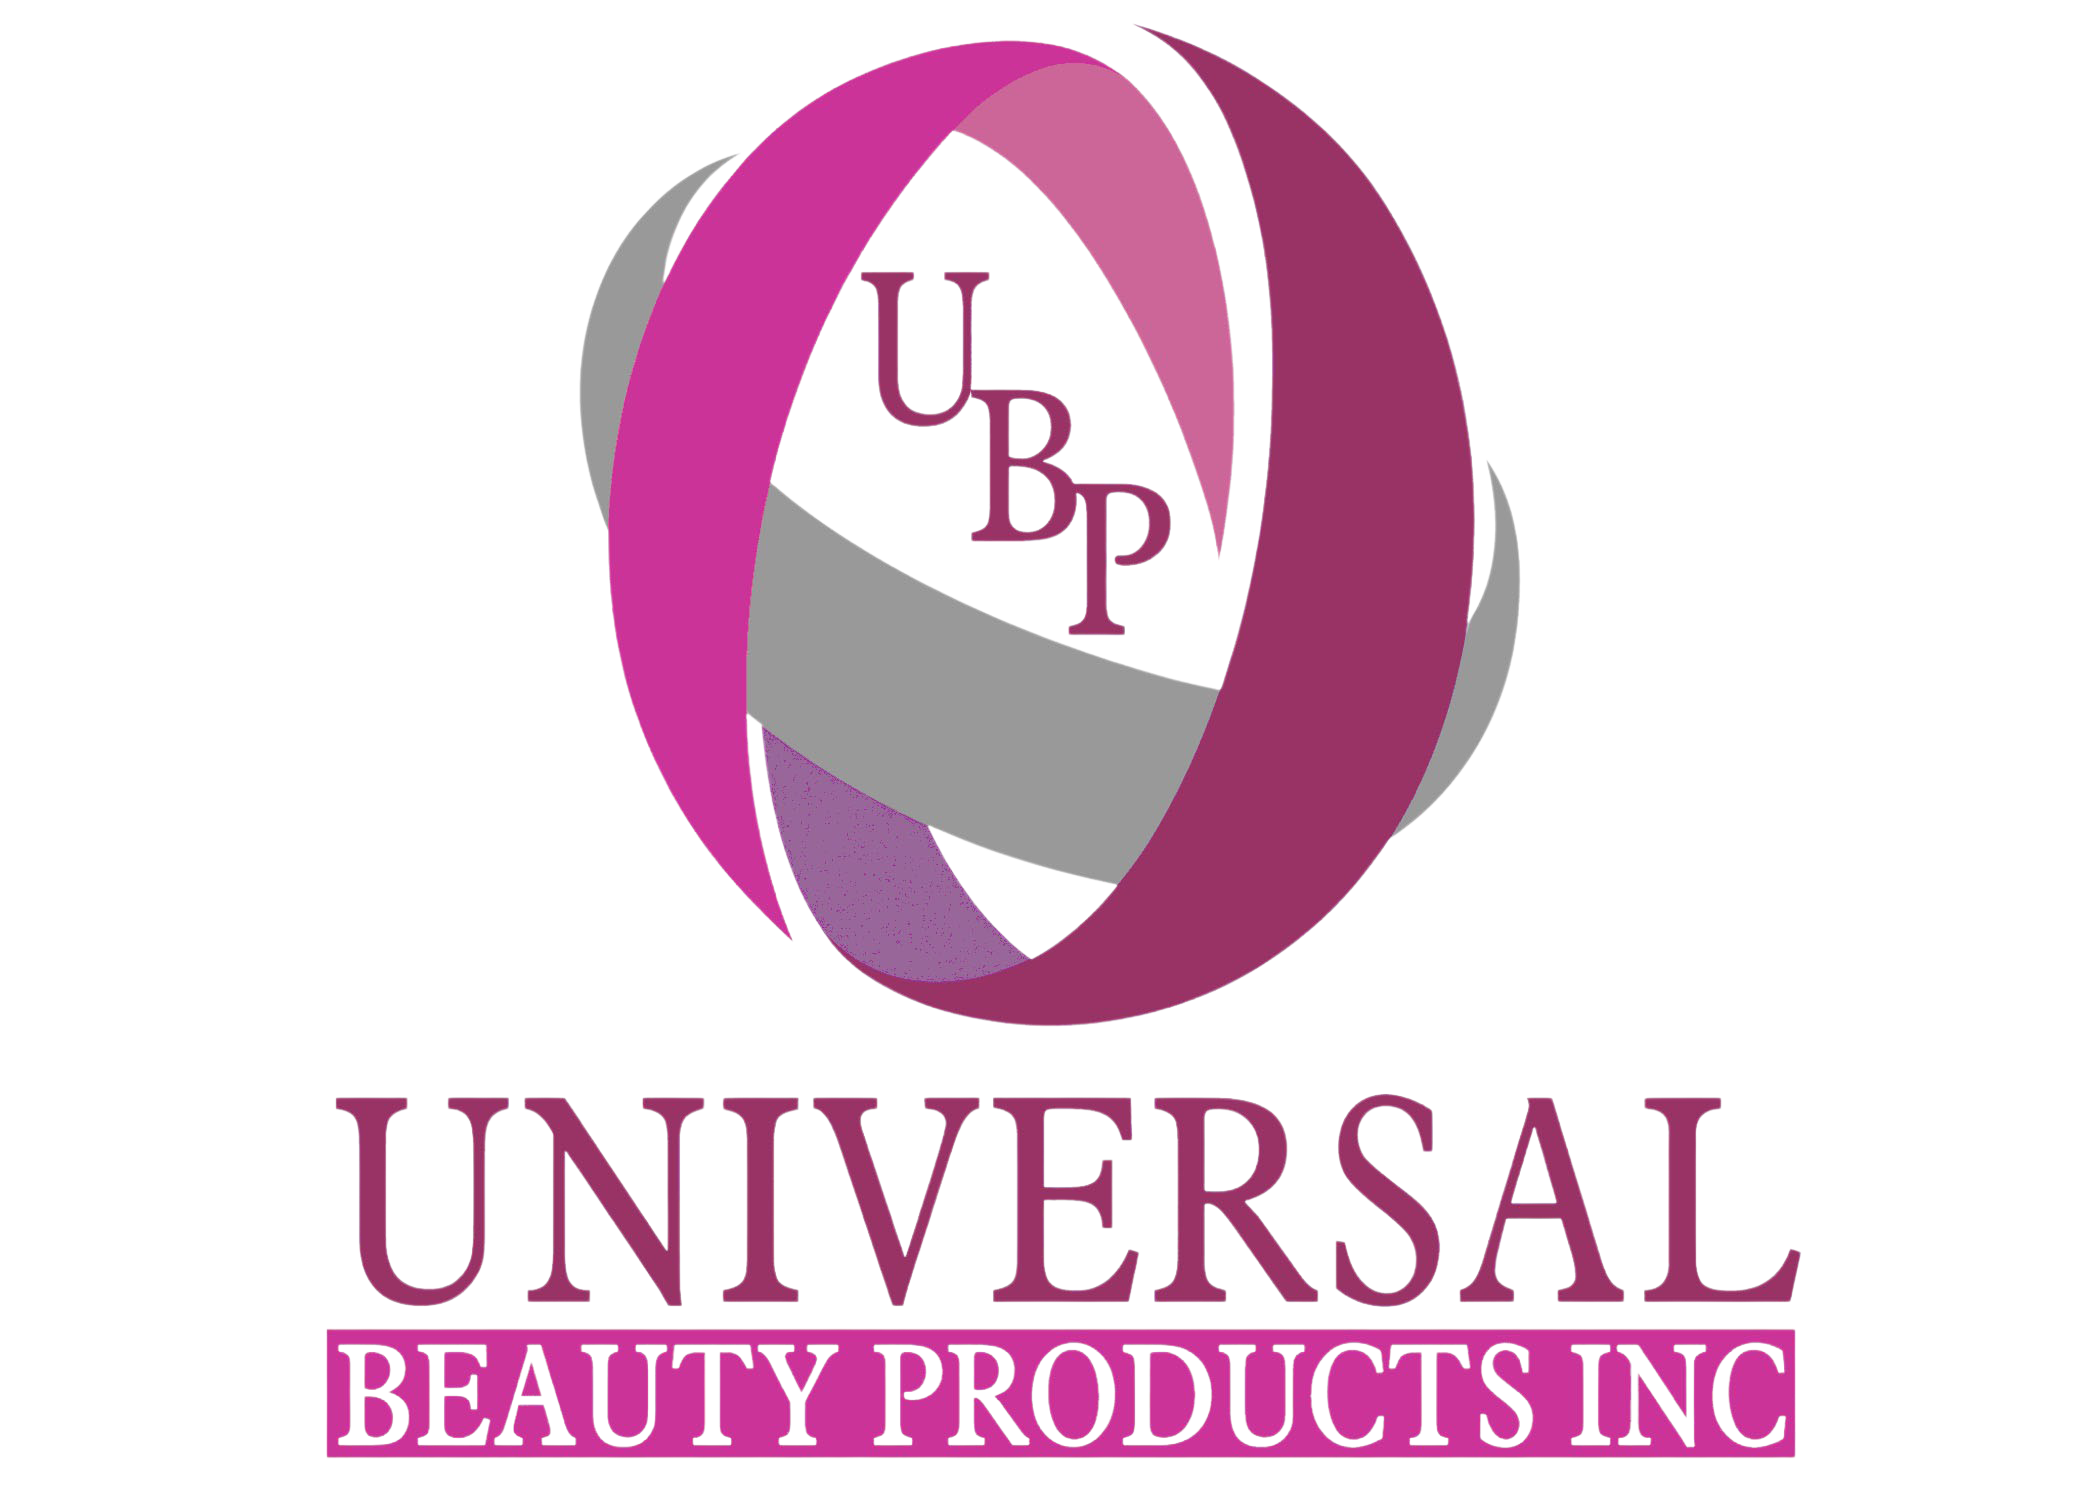 Universal Beauty Products, Inc.